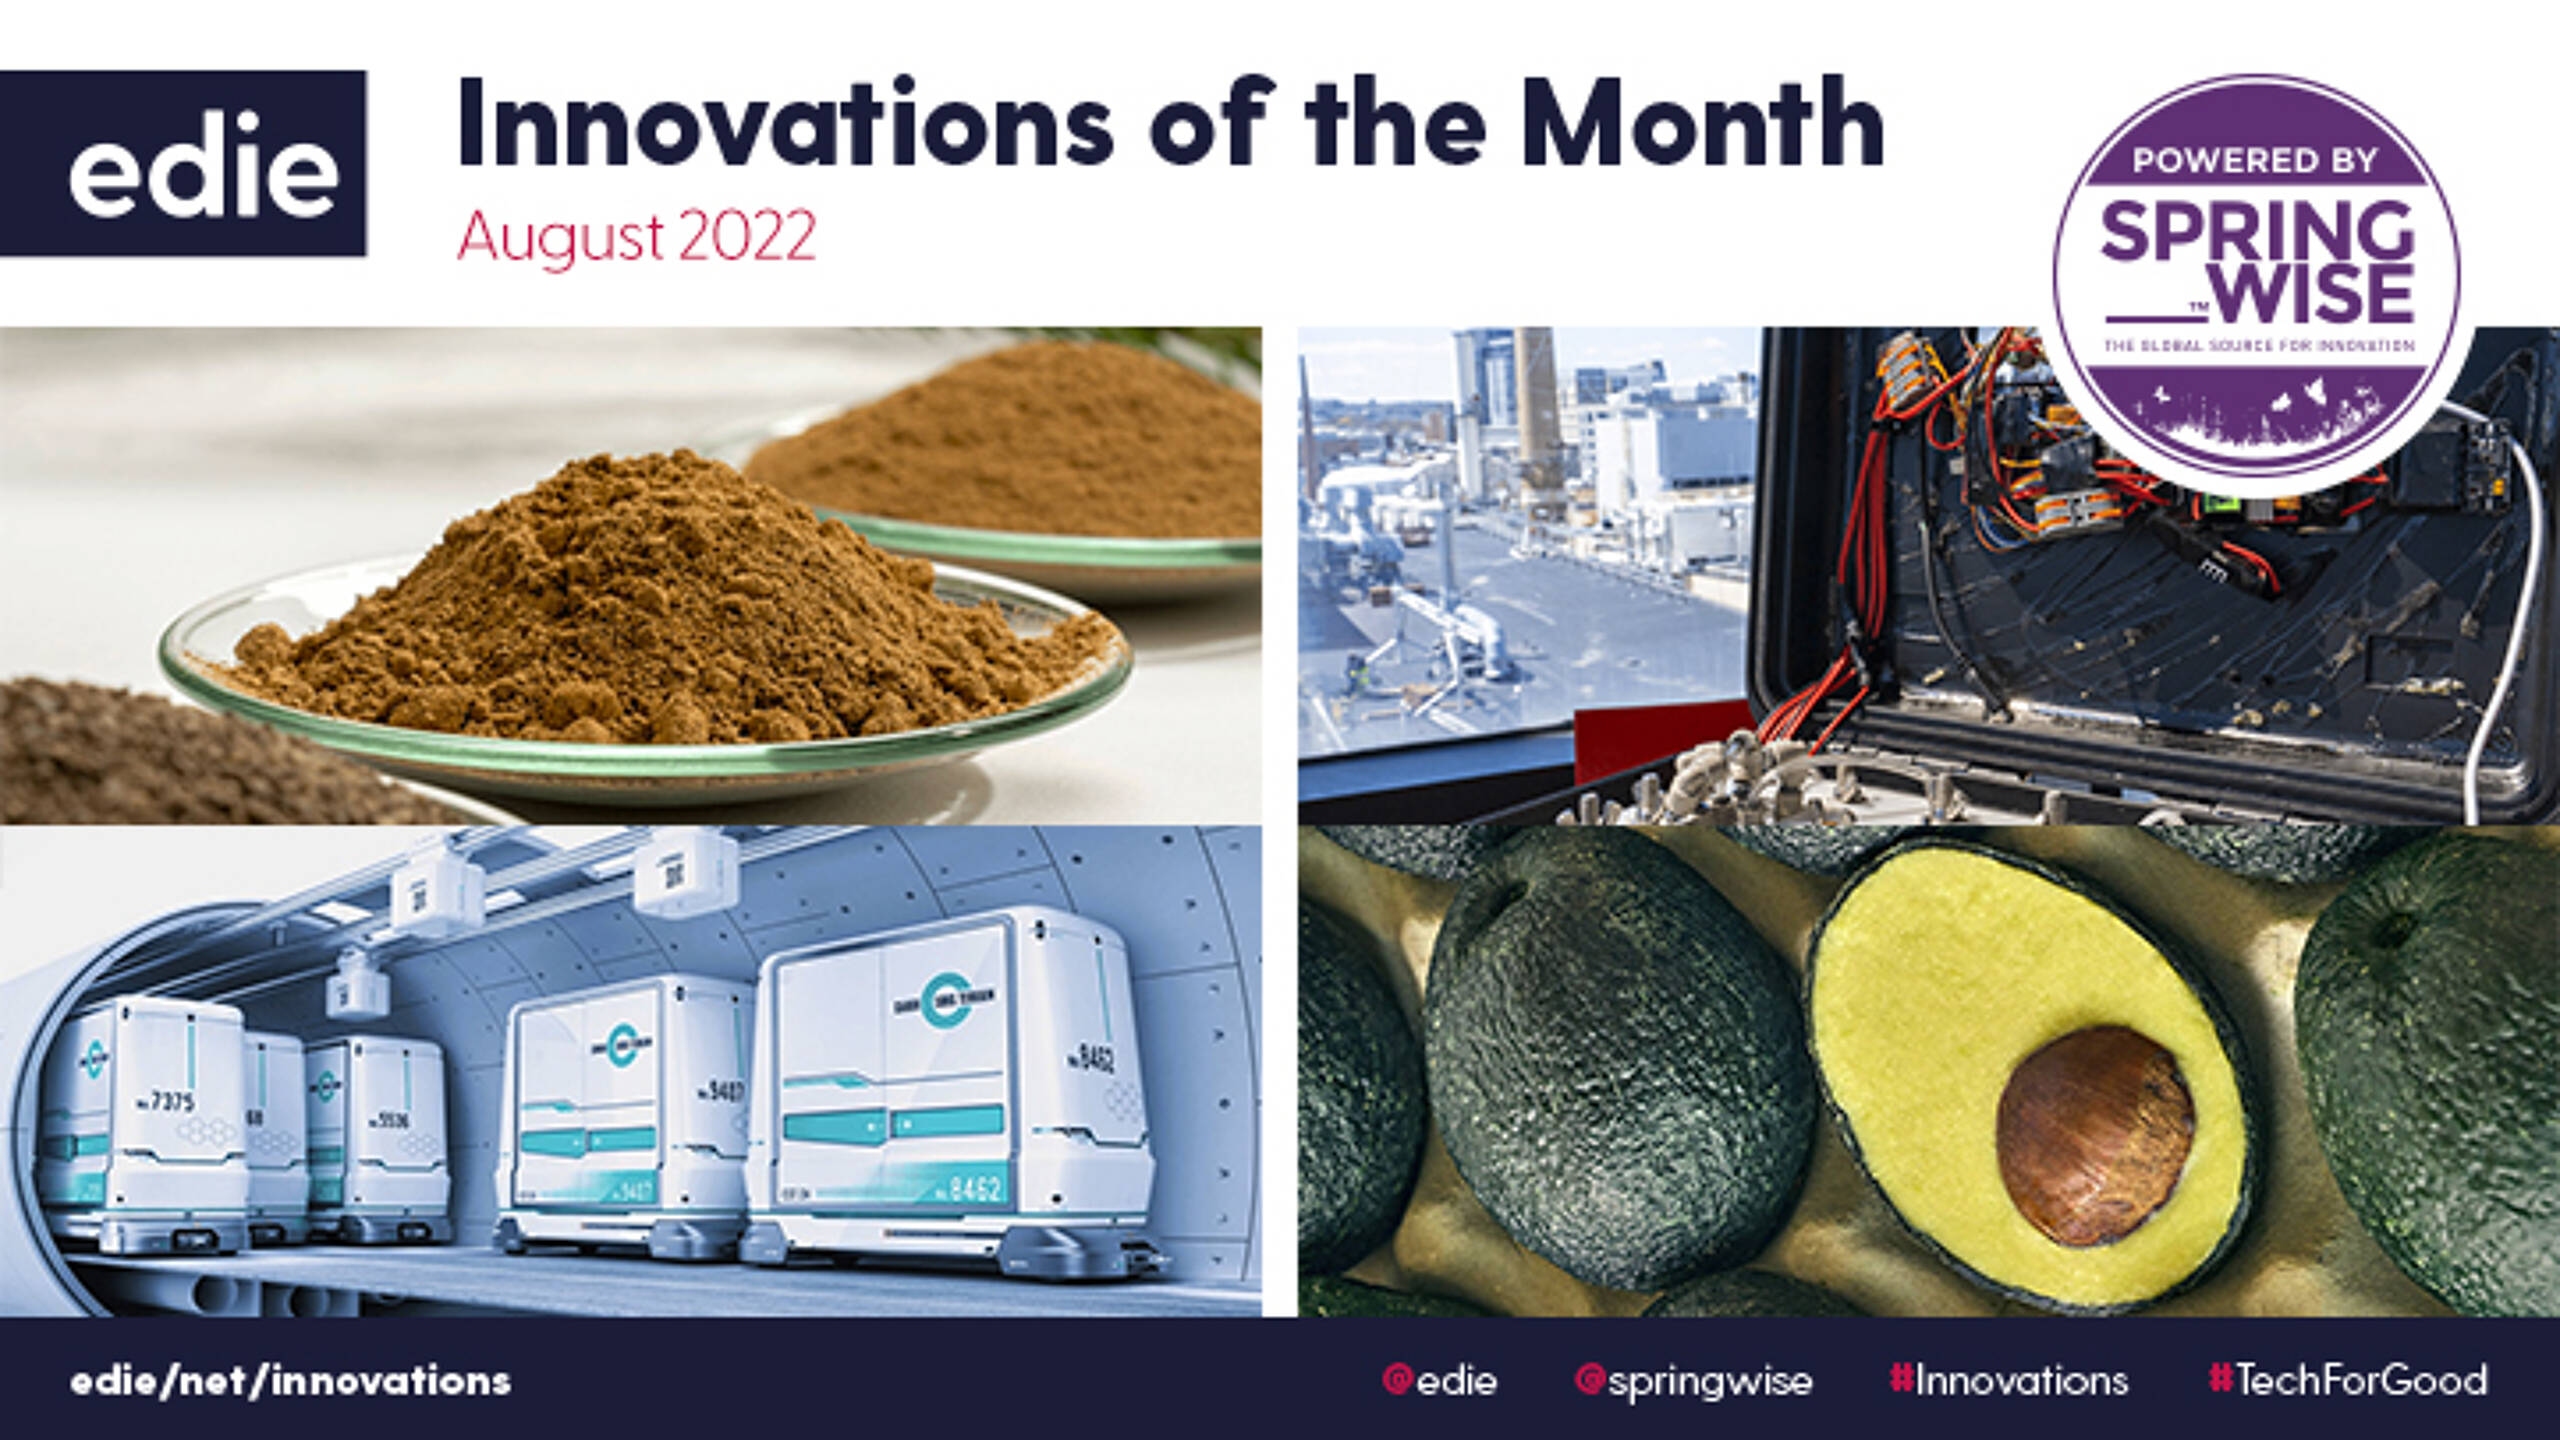 Wooden batteries and bean-based avocados: The best green innovations of August 2022